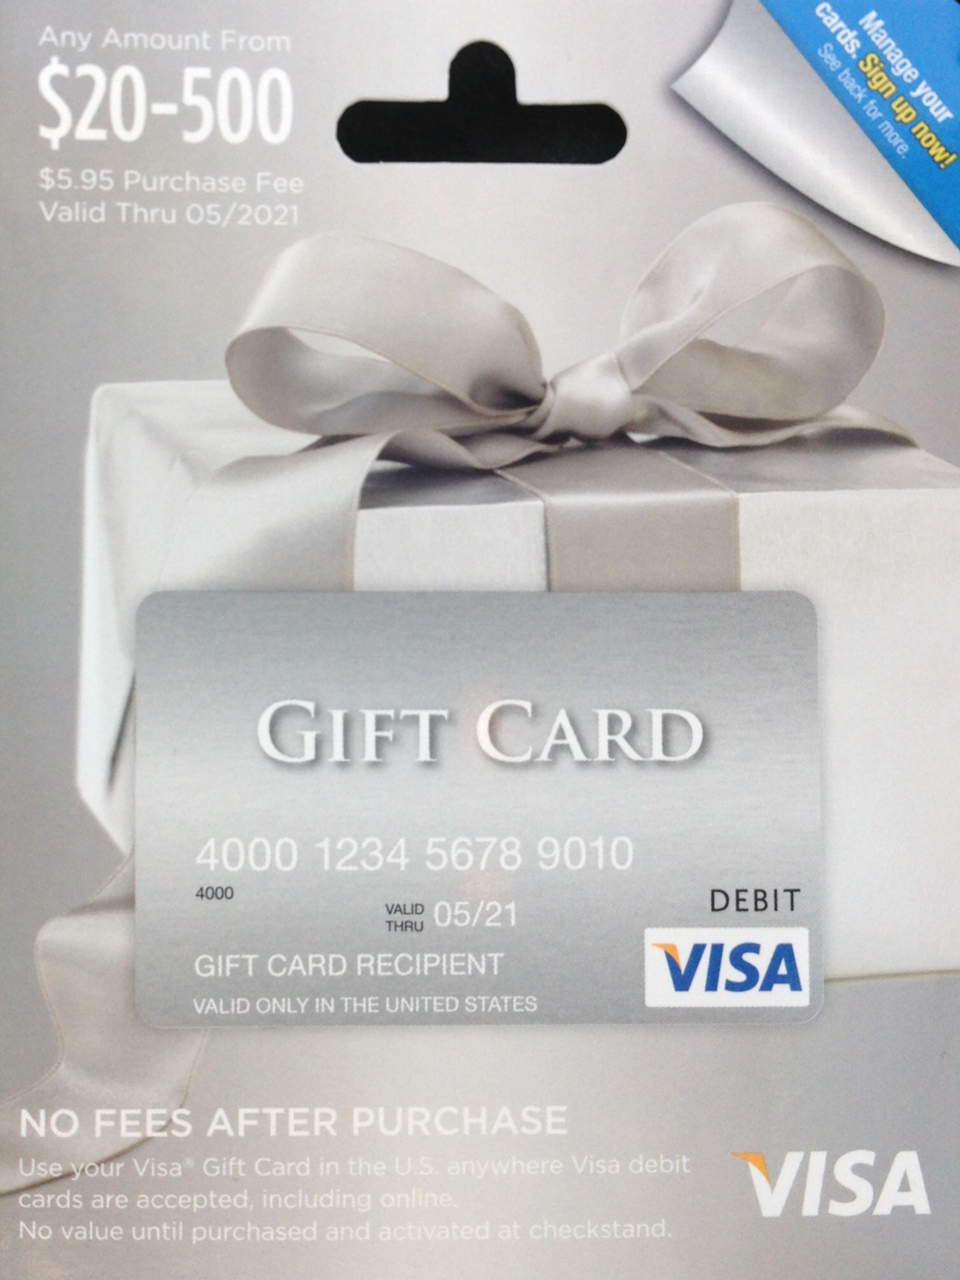 What denomination amounts does Visa offer for its gift cards?